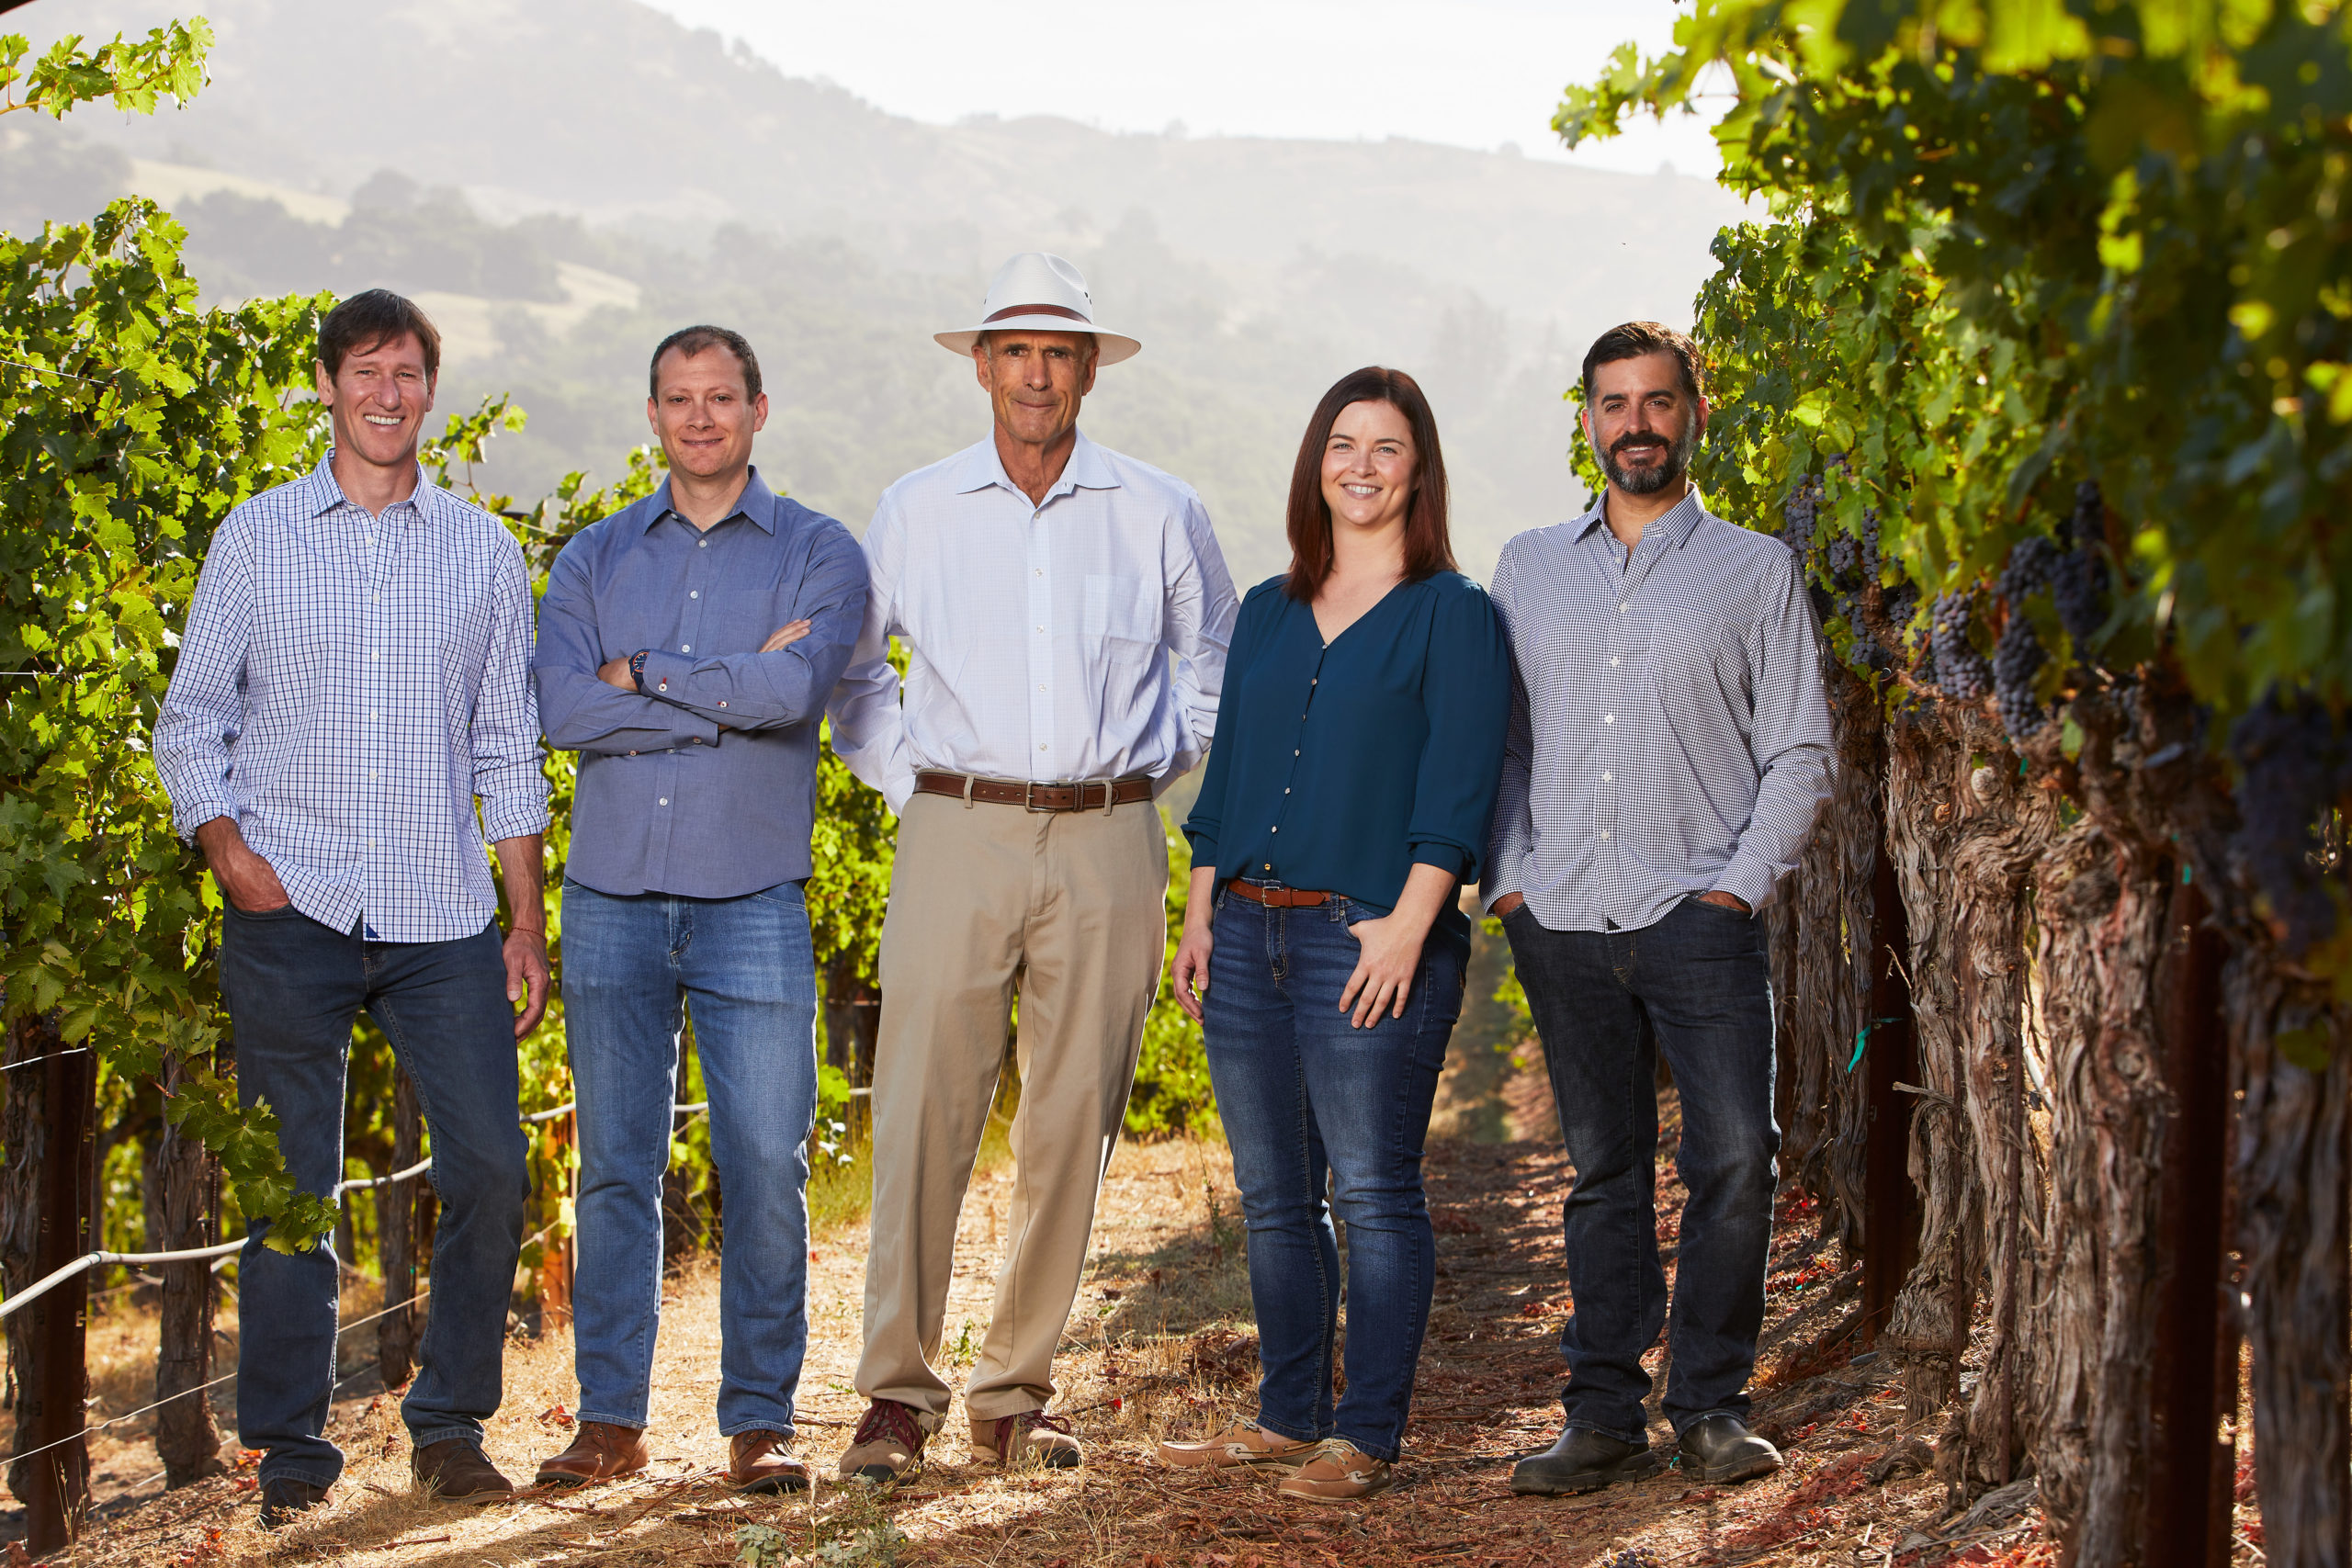 Four men and one woman stand smiling in a lush green vineyard with the setting sun behind them